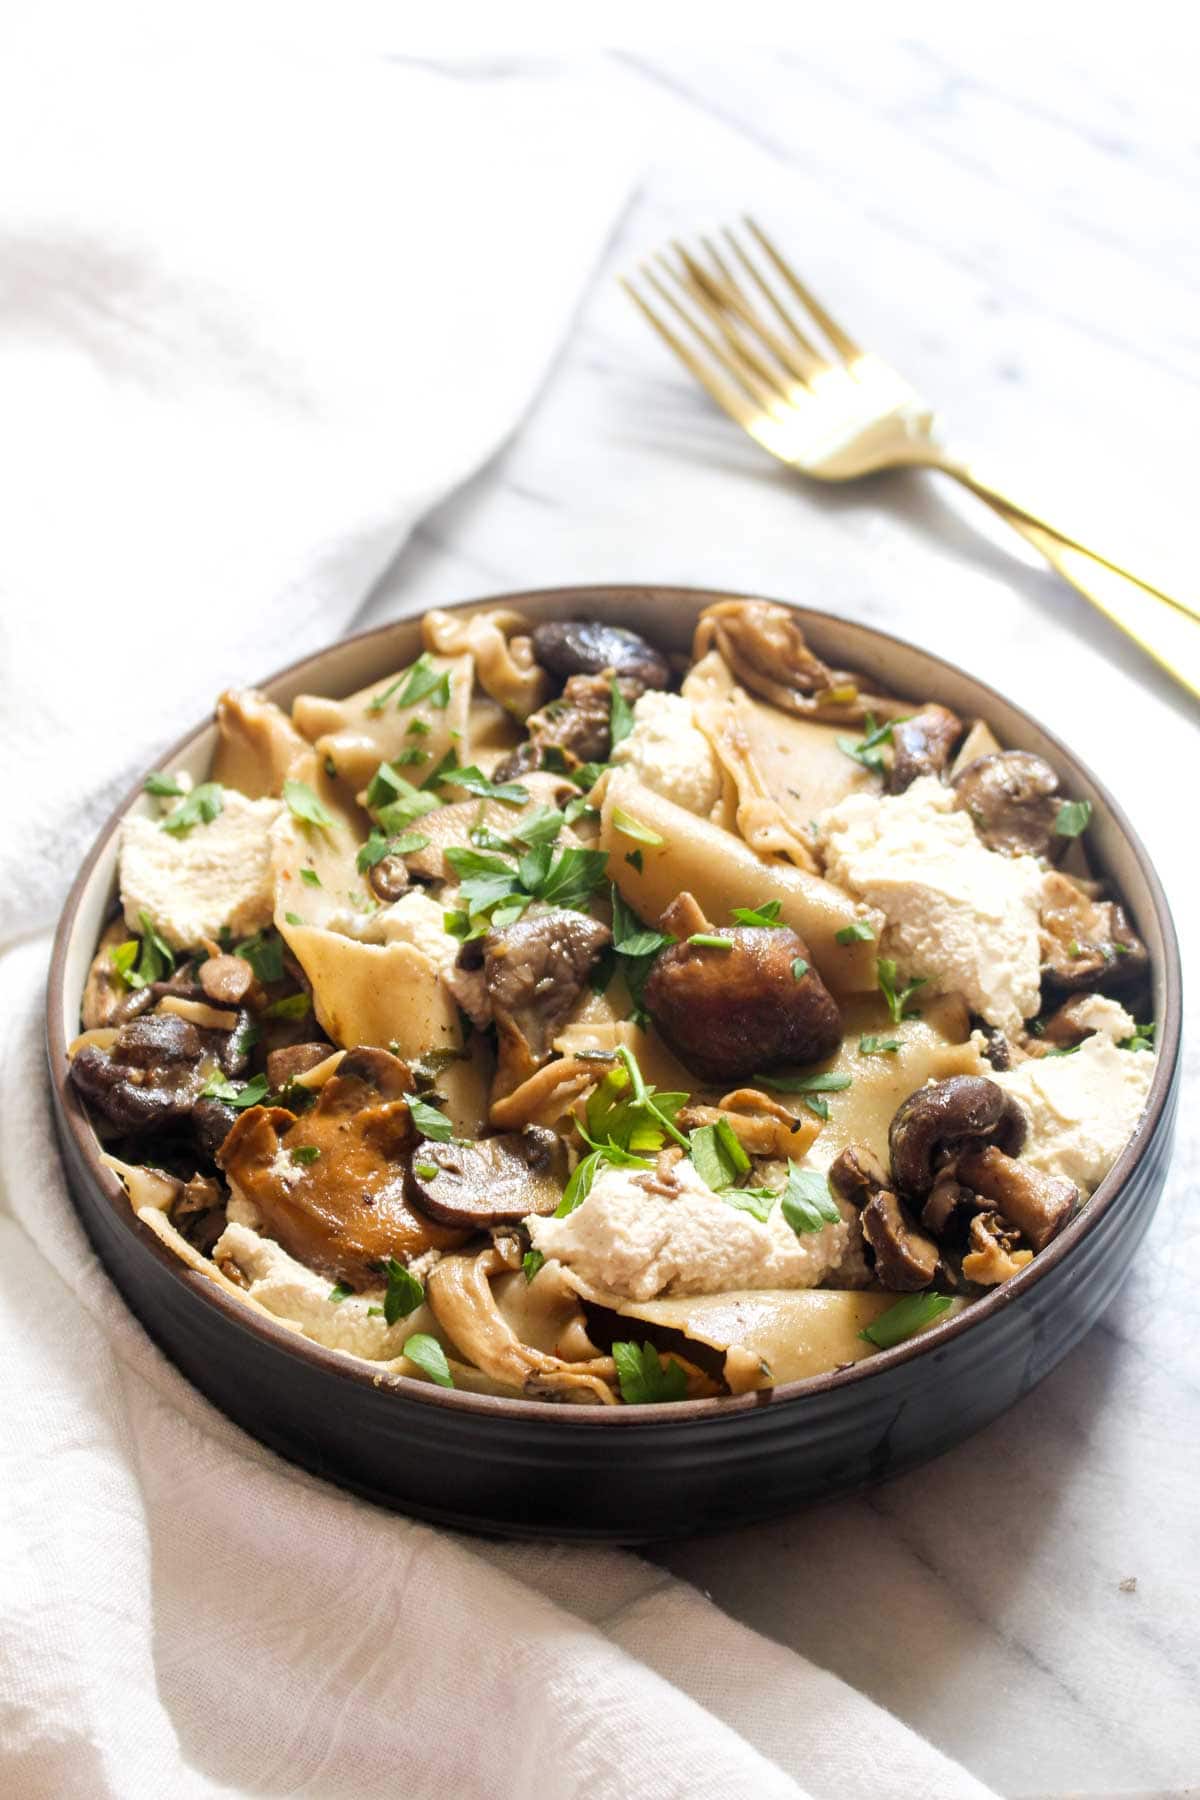 This Broken Wild Mushroom Lasagna is a warm, earthy and impressive, but is a secretly an easy to make and healthy gluten free and vegan dish!